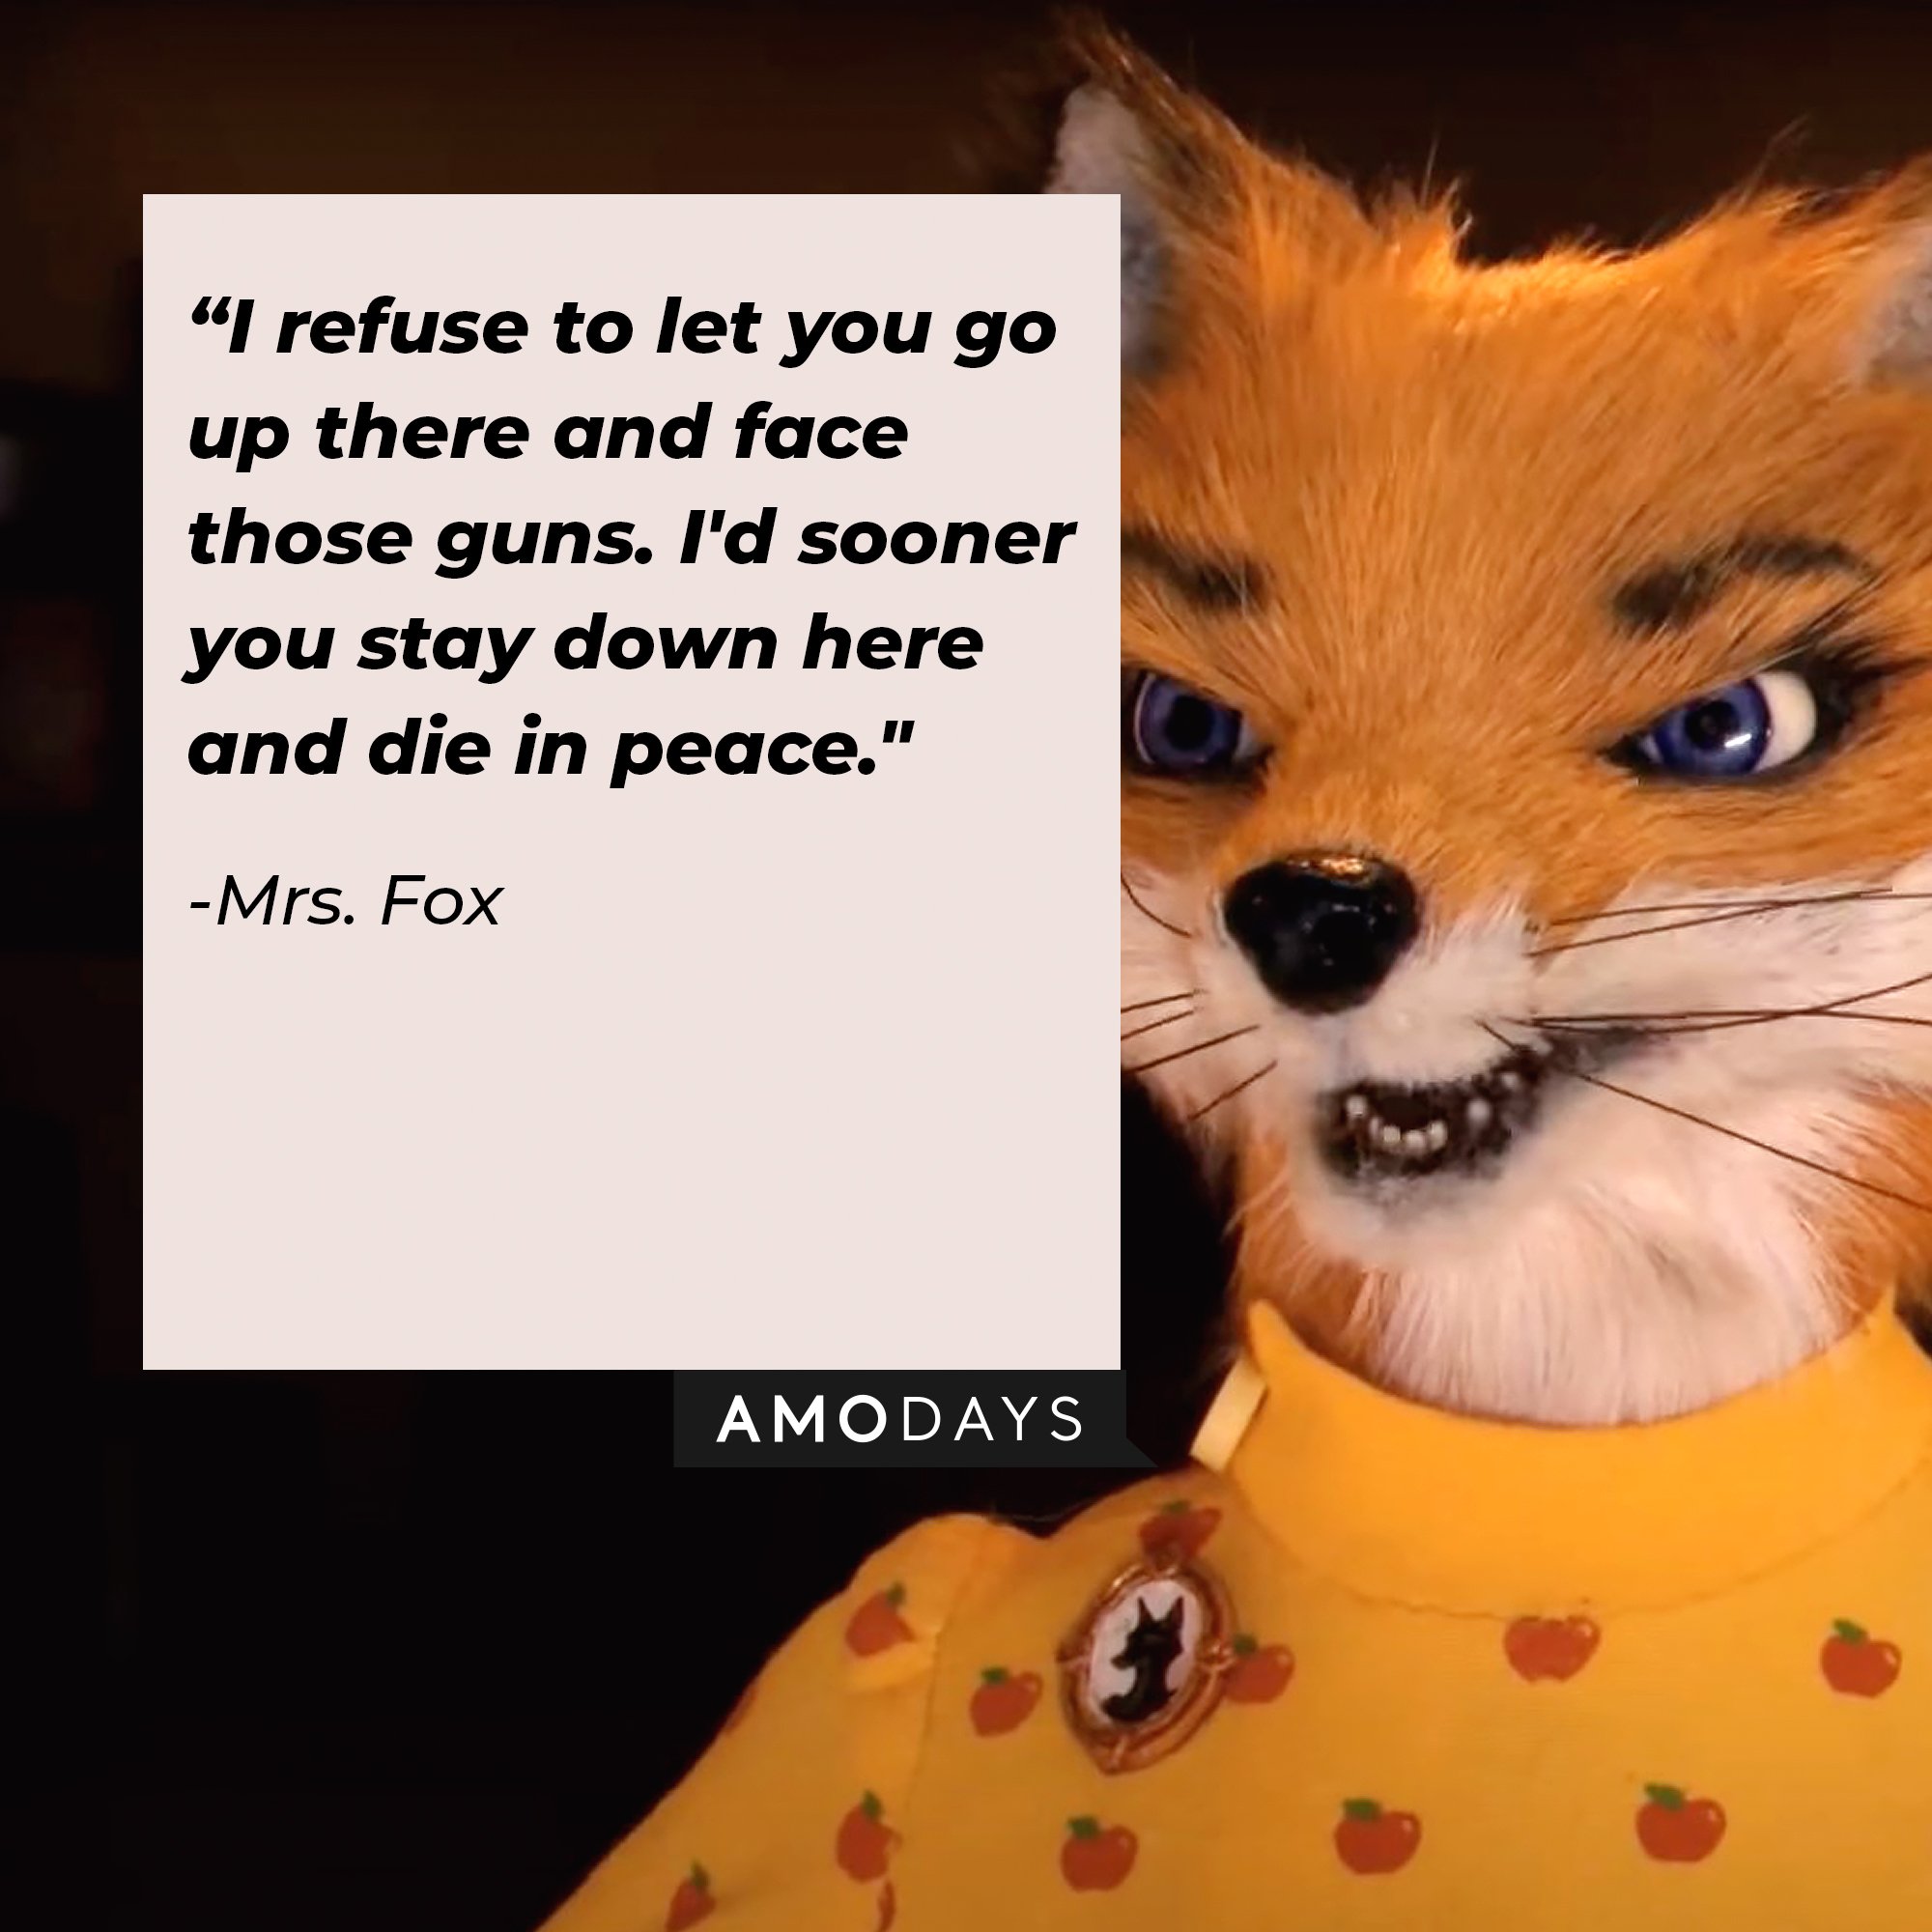 Mrs. Fox's Quote: "I refuse to let you go up there and face those guns. I'd sooner you stay down here and die in peace." | Image: AmoDays